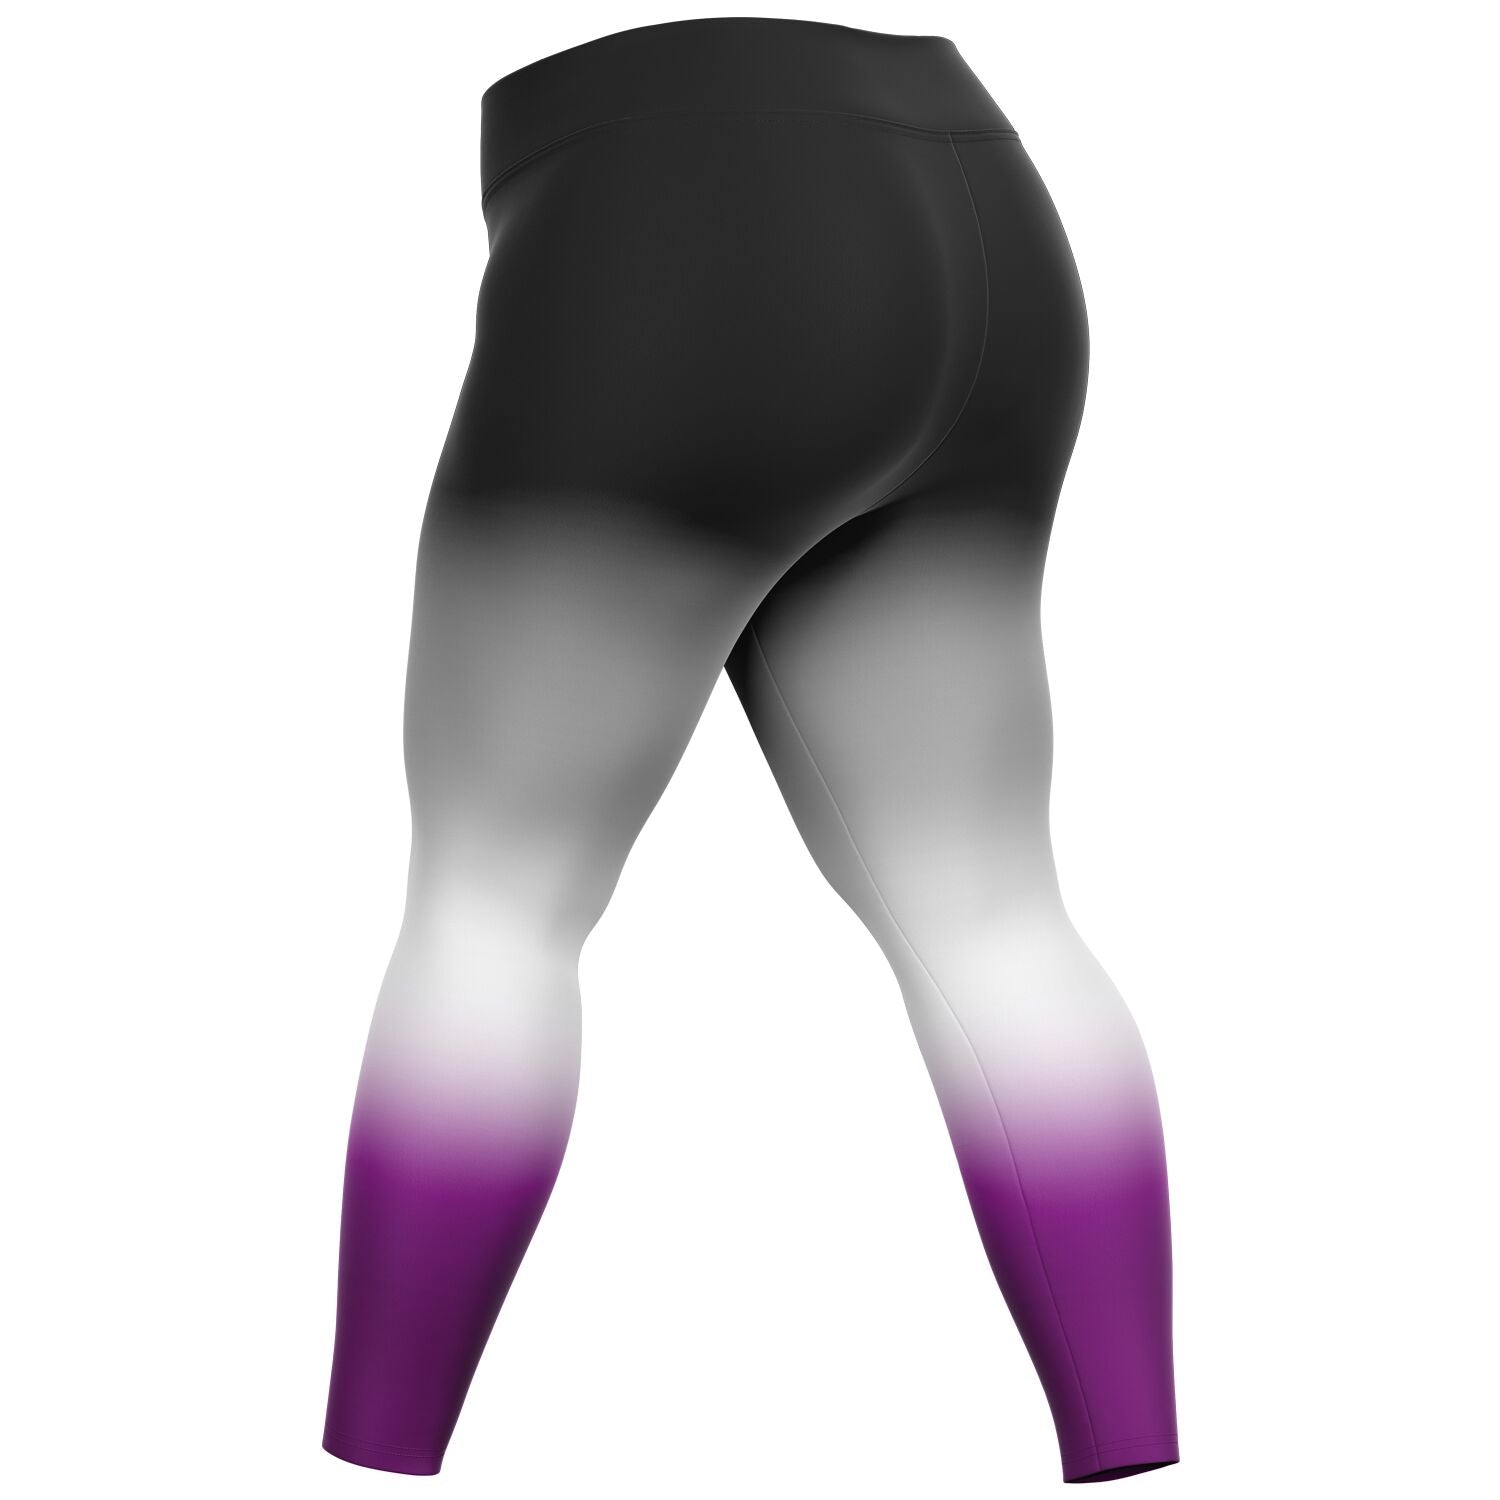 Ombre Black to Pink Plus Size Leggings